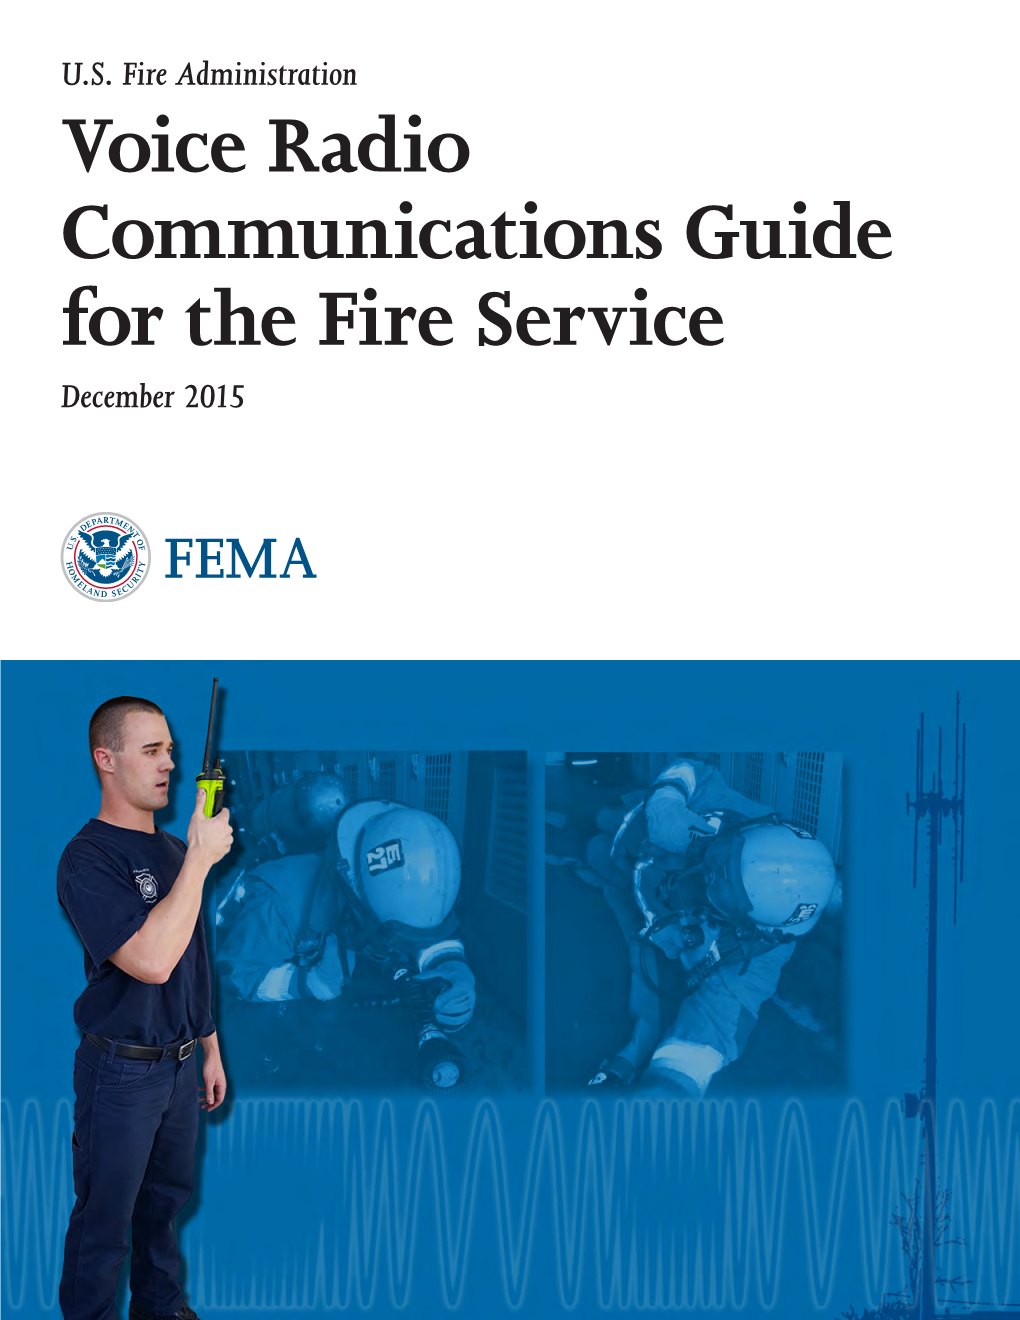 Voice Radio Communications Guide for the Fire Service December 2015